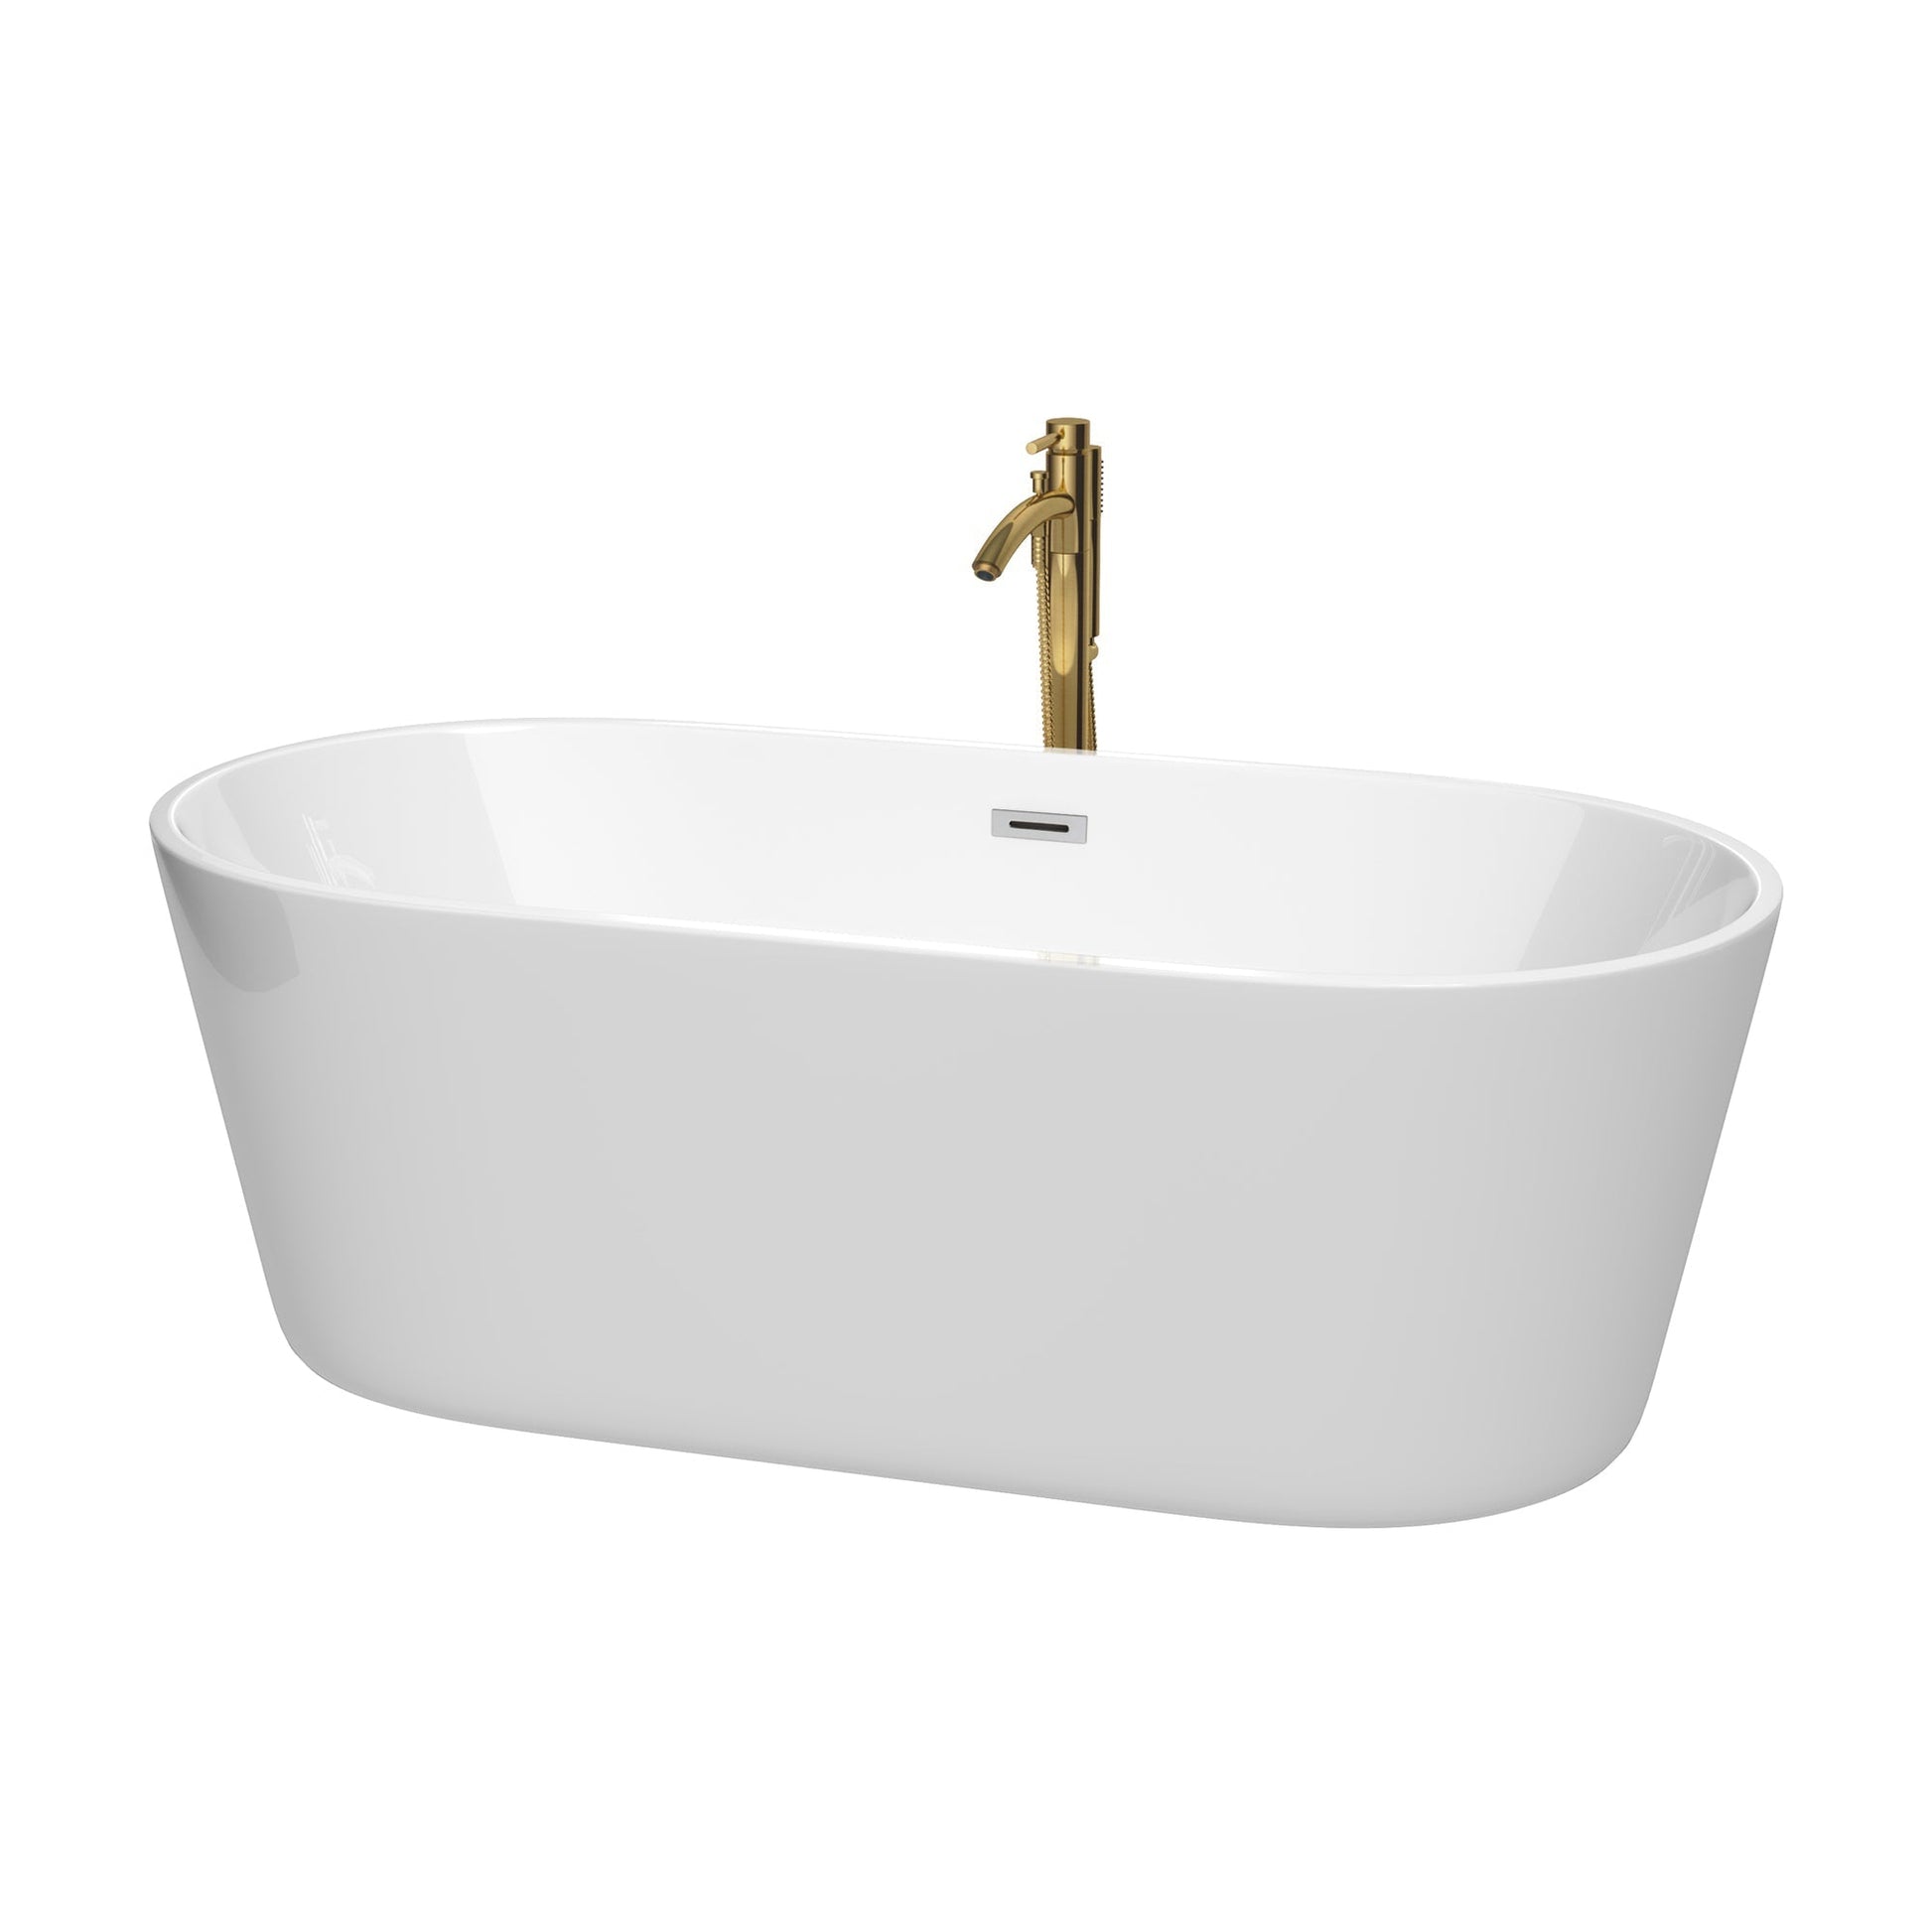 Wyndham Collection Carissa 67" Freestanding Bathtub in White With Polished Chrome Trim and Floor Mounted Faucet in Brushed Gold